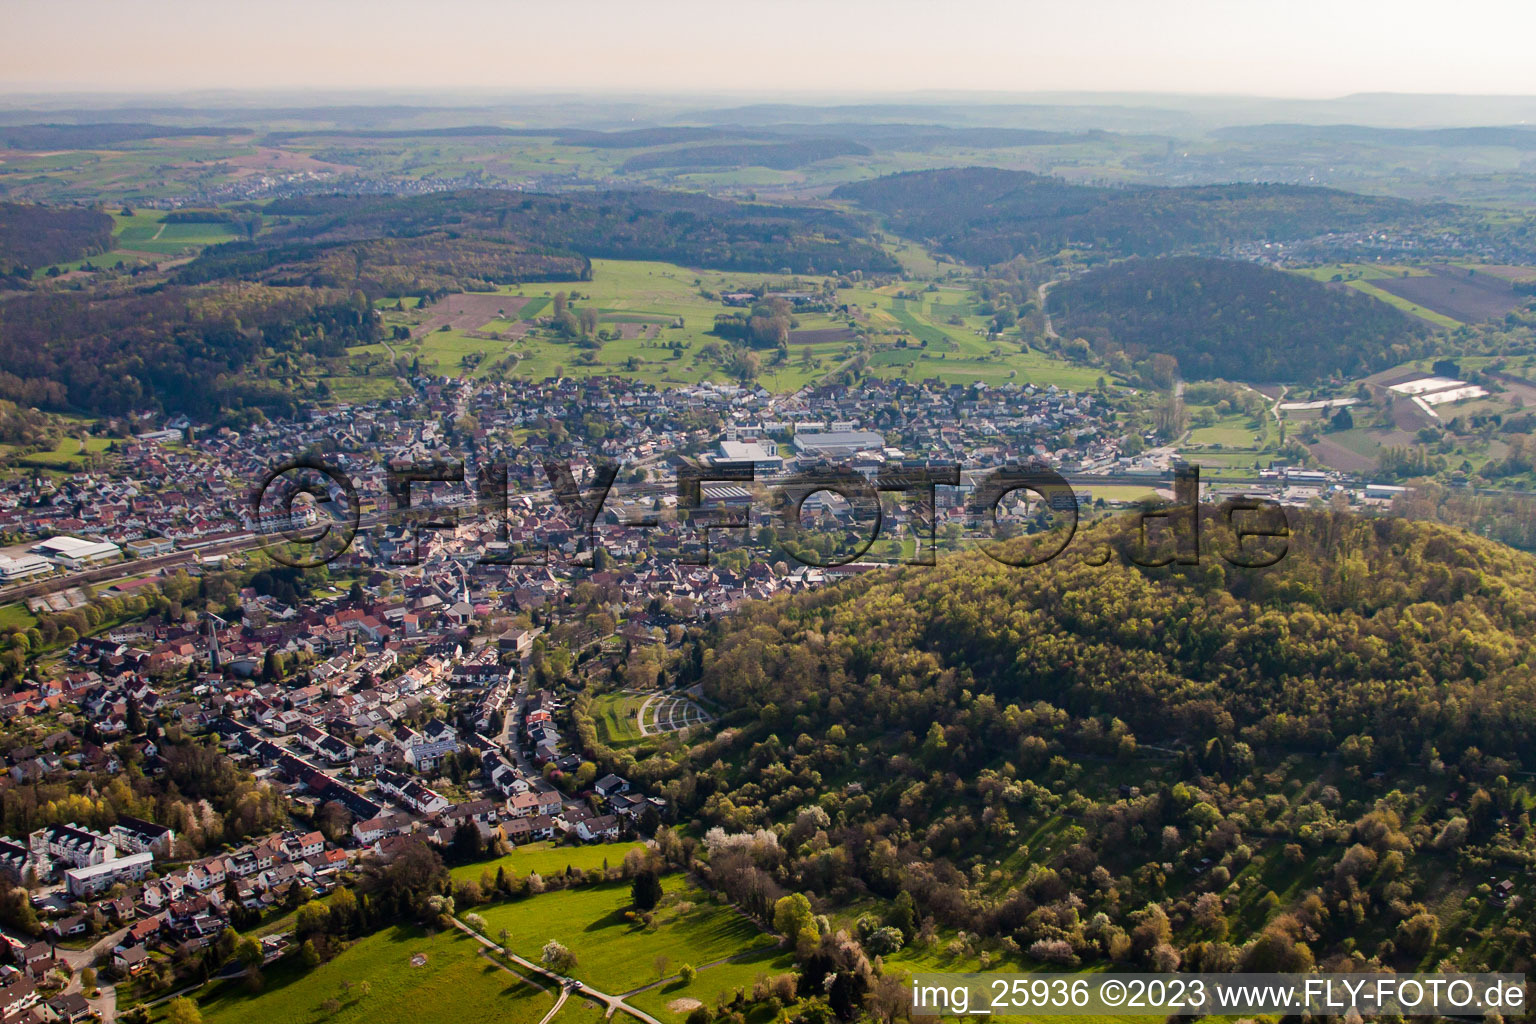 Aerial view of From the south in the district Berghausen in Pfinztal in the state Baden-Wuerttemberg, Germany